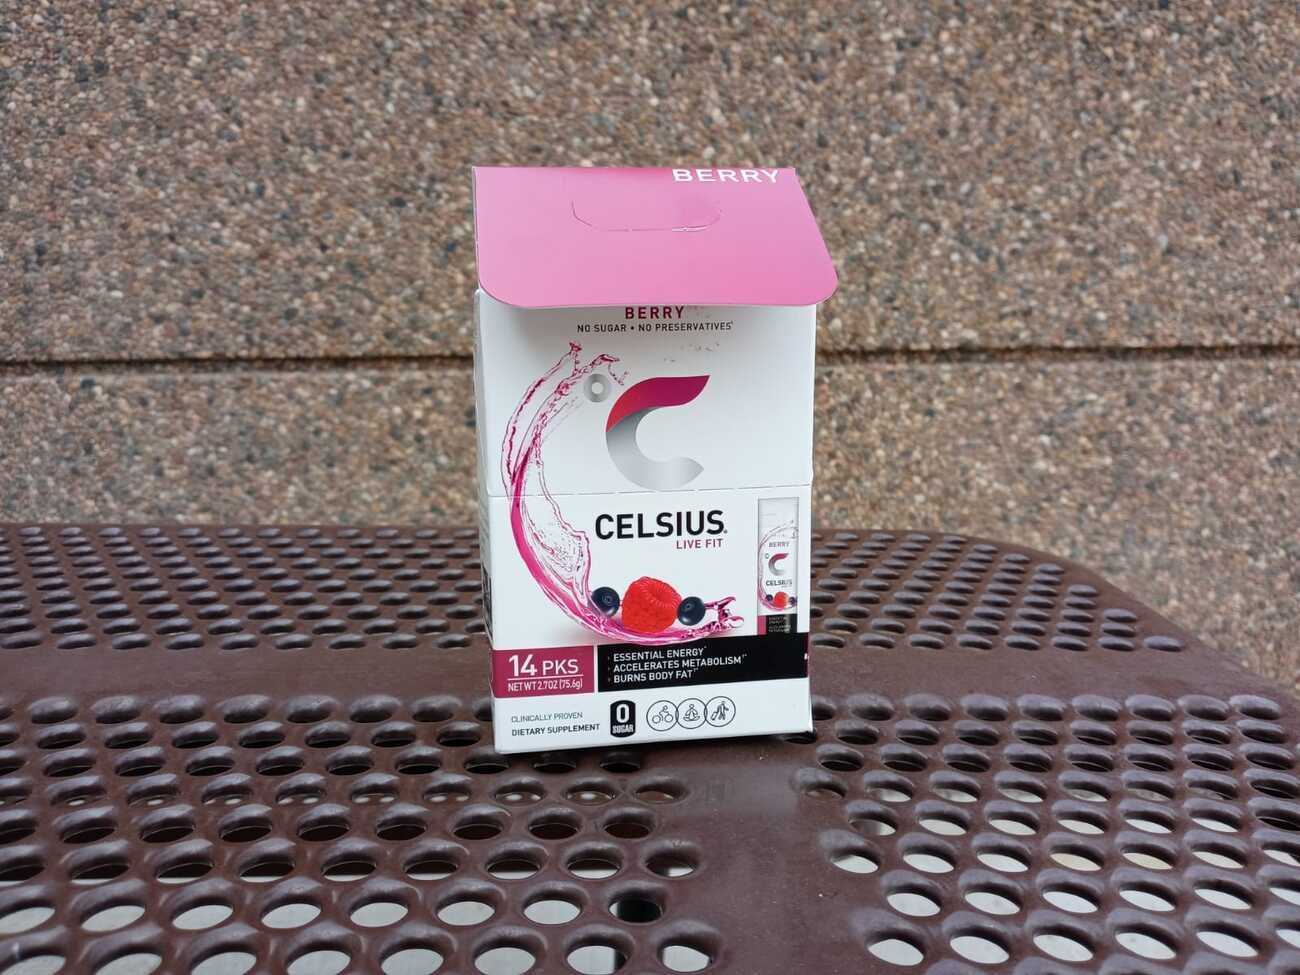 Berry-flavored Celsius on-the-go